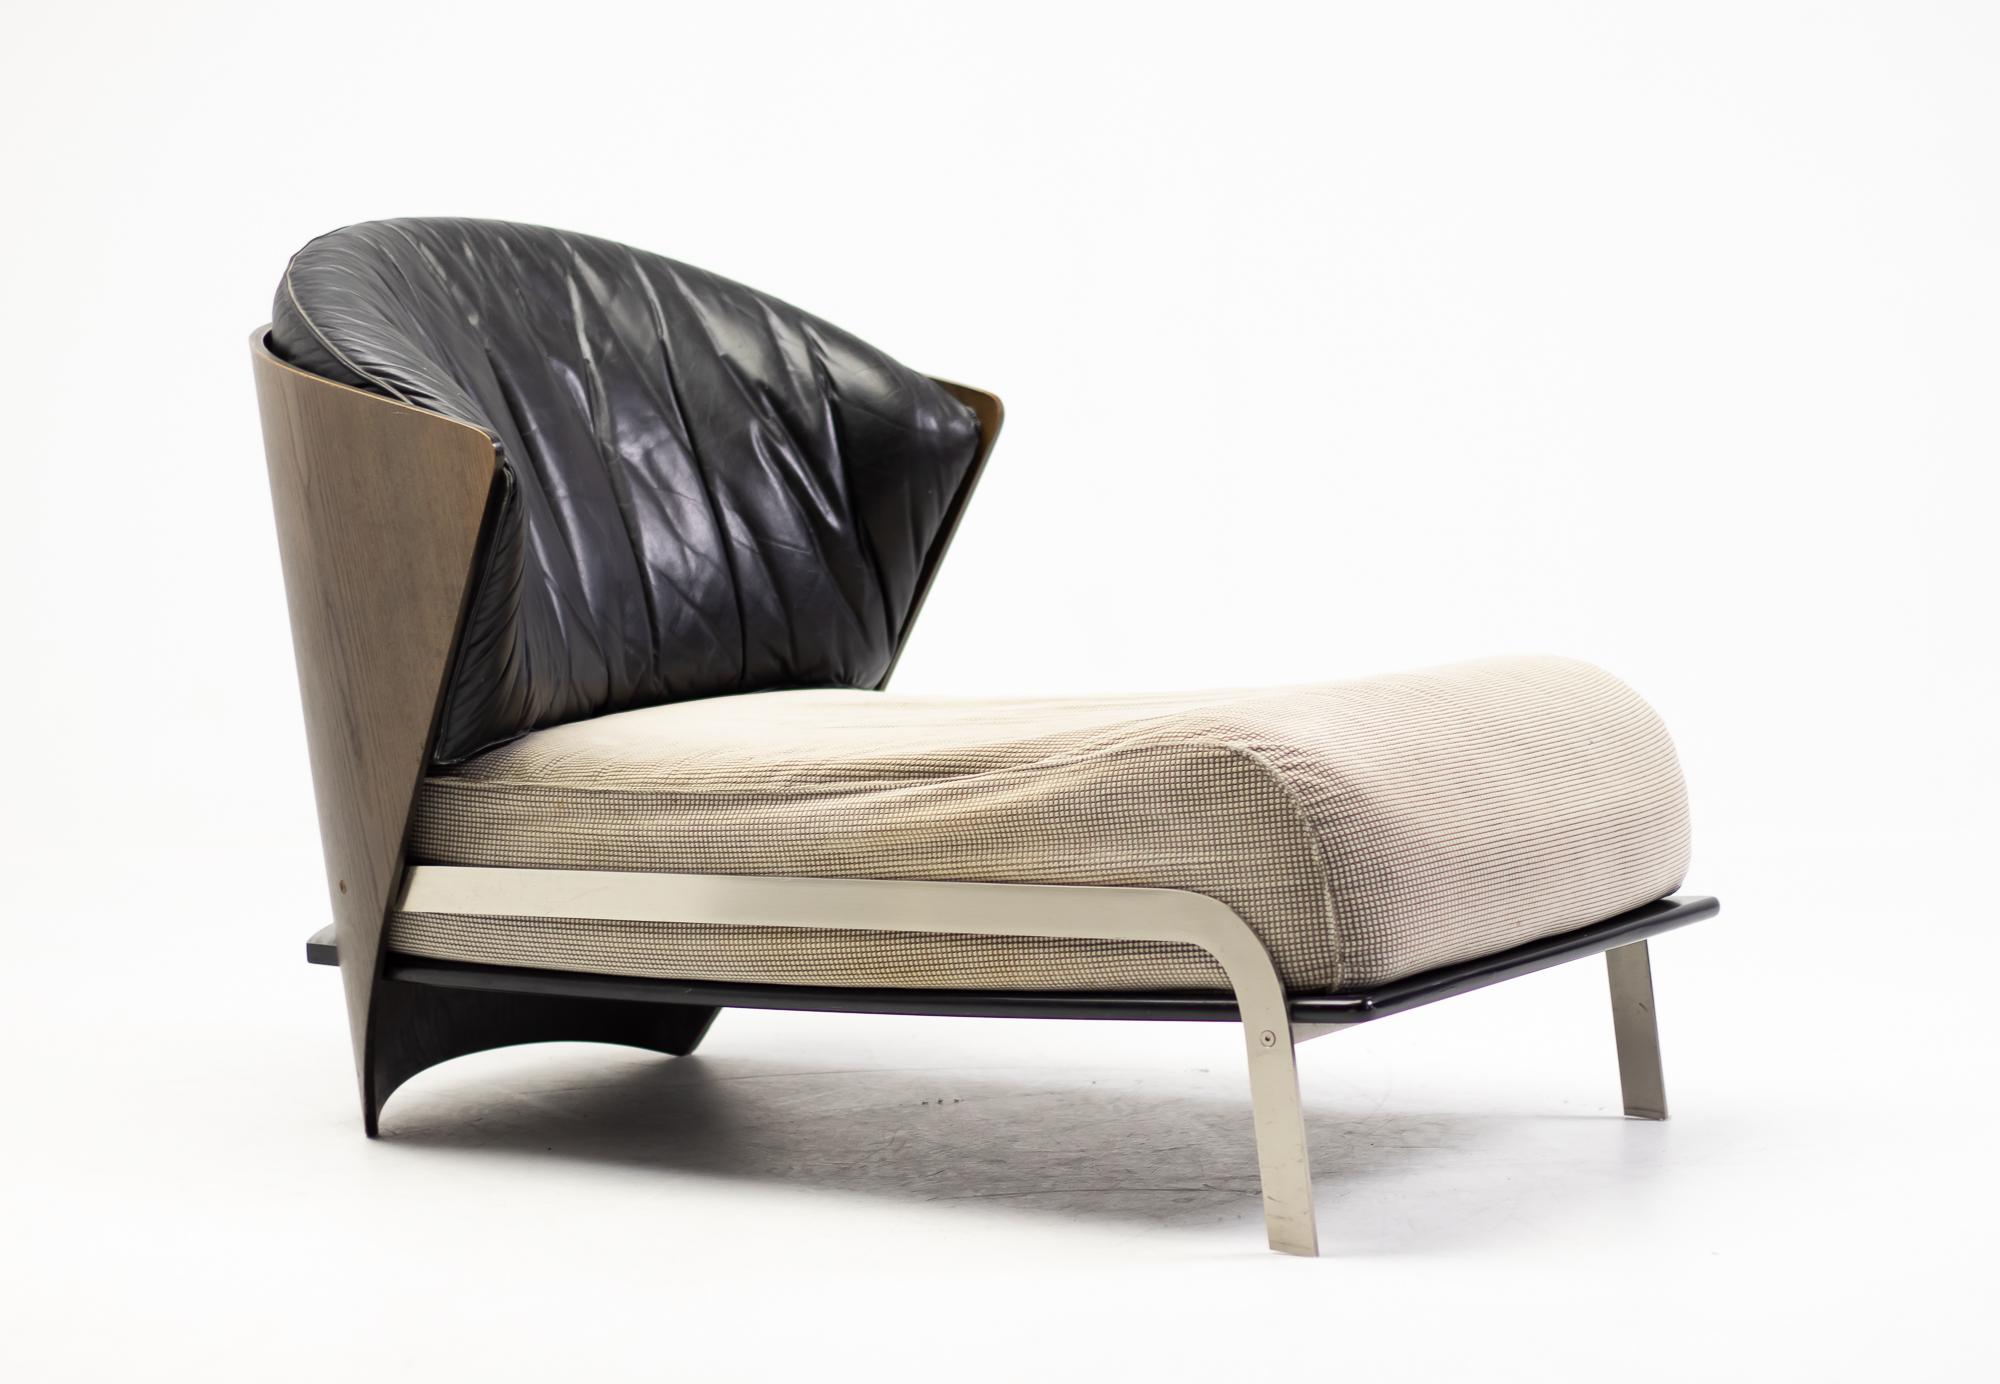 Cappellini "Elba Lunga" Chaise by Franco Raggi For Sale at 1stDibs